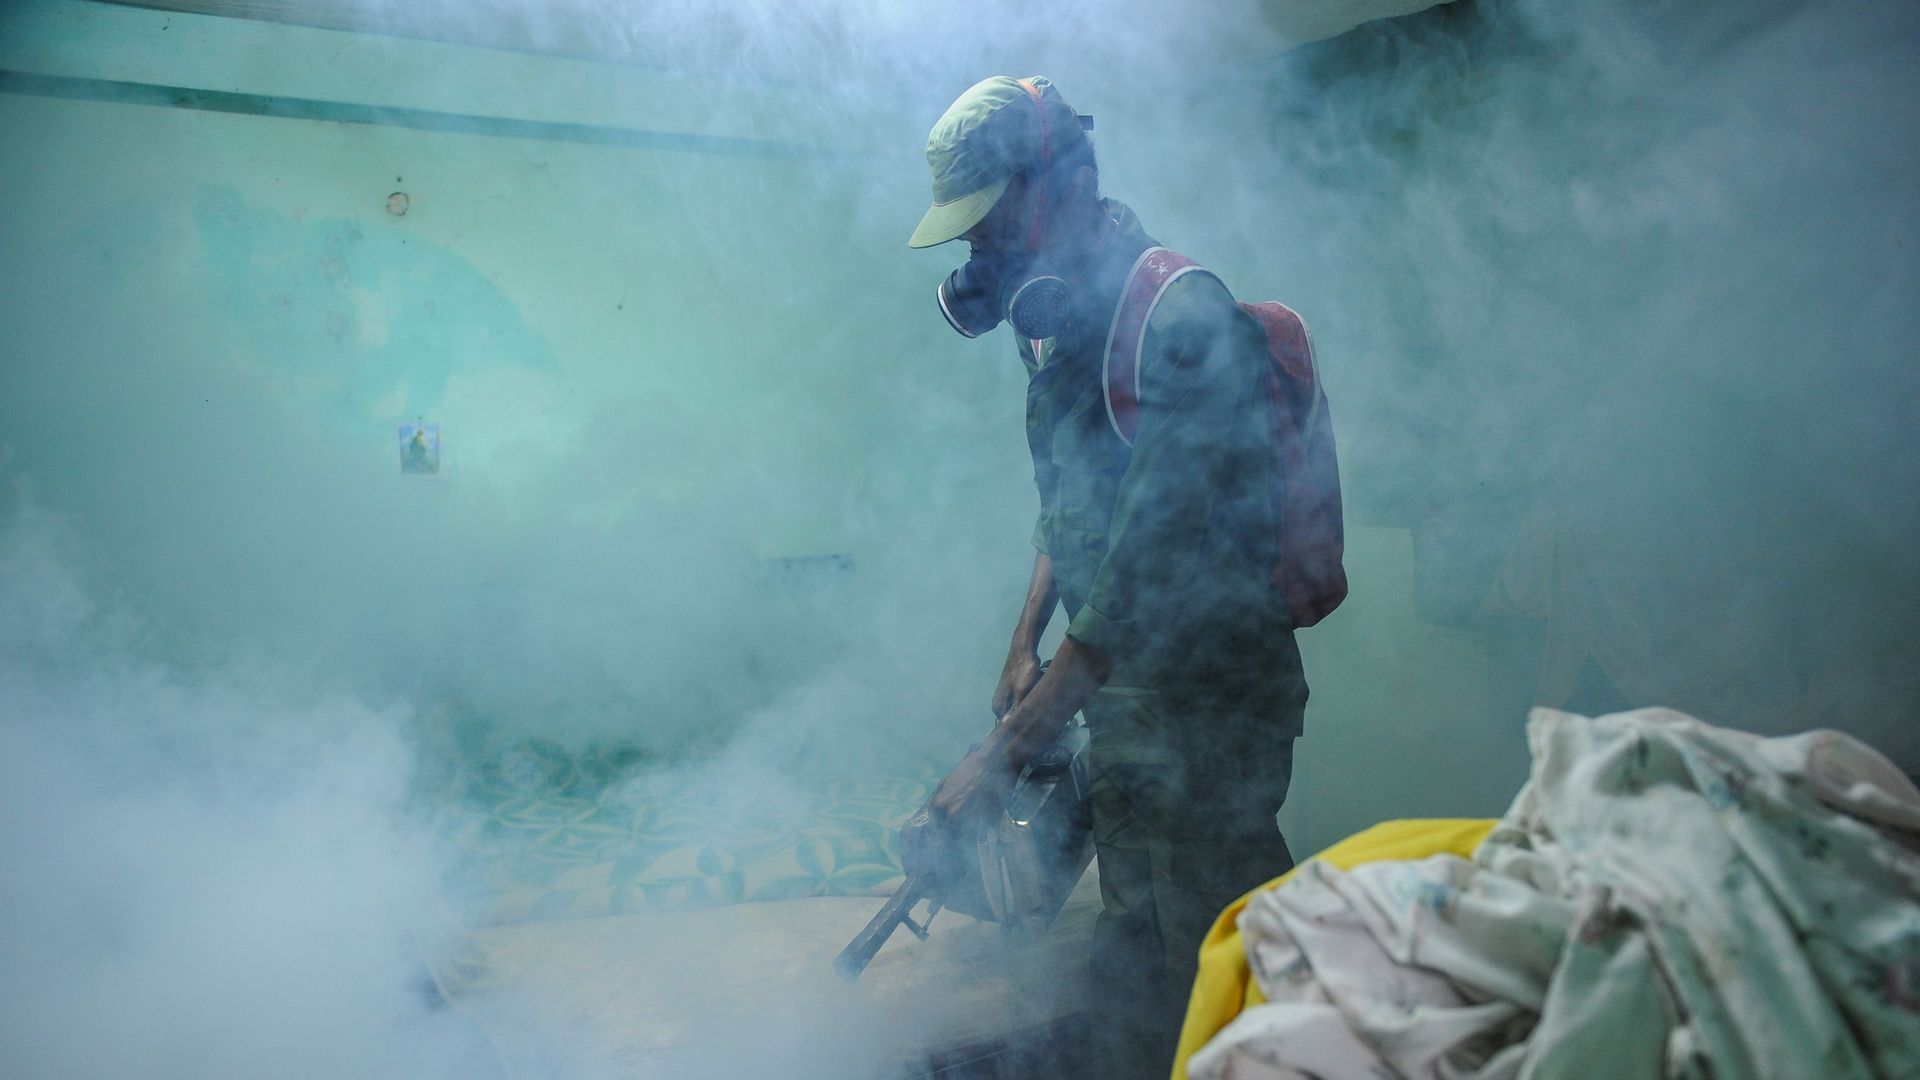 Member of the Cuban army fumigates against mosquitoes following Zika outbreak